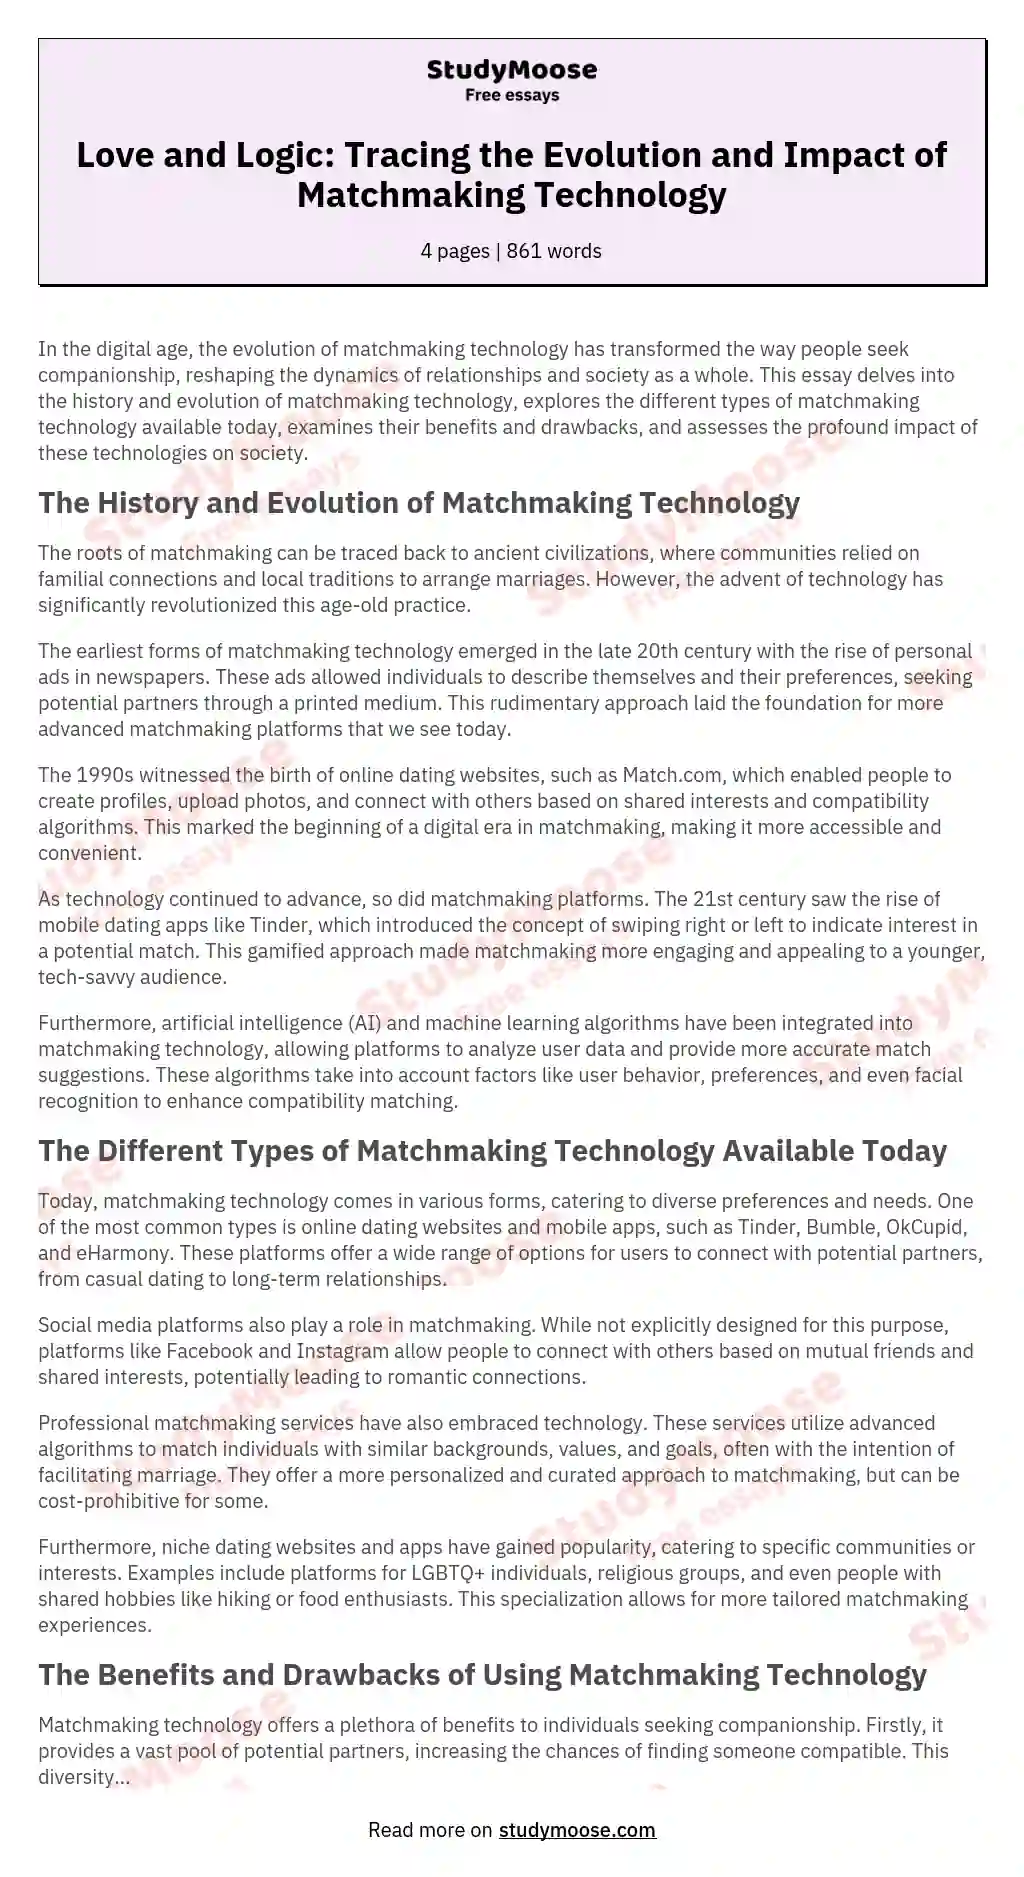 Love and Logic: Tracing the Evolution and Impact of Matchmaking Technology essay